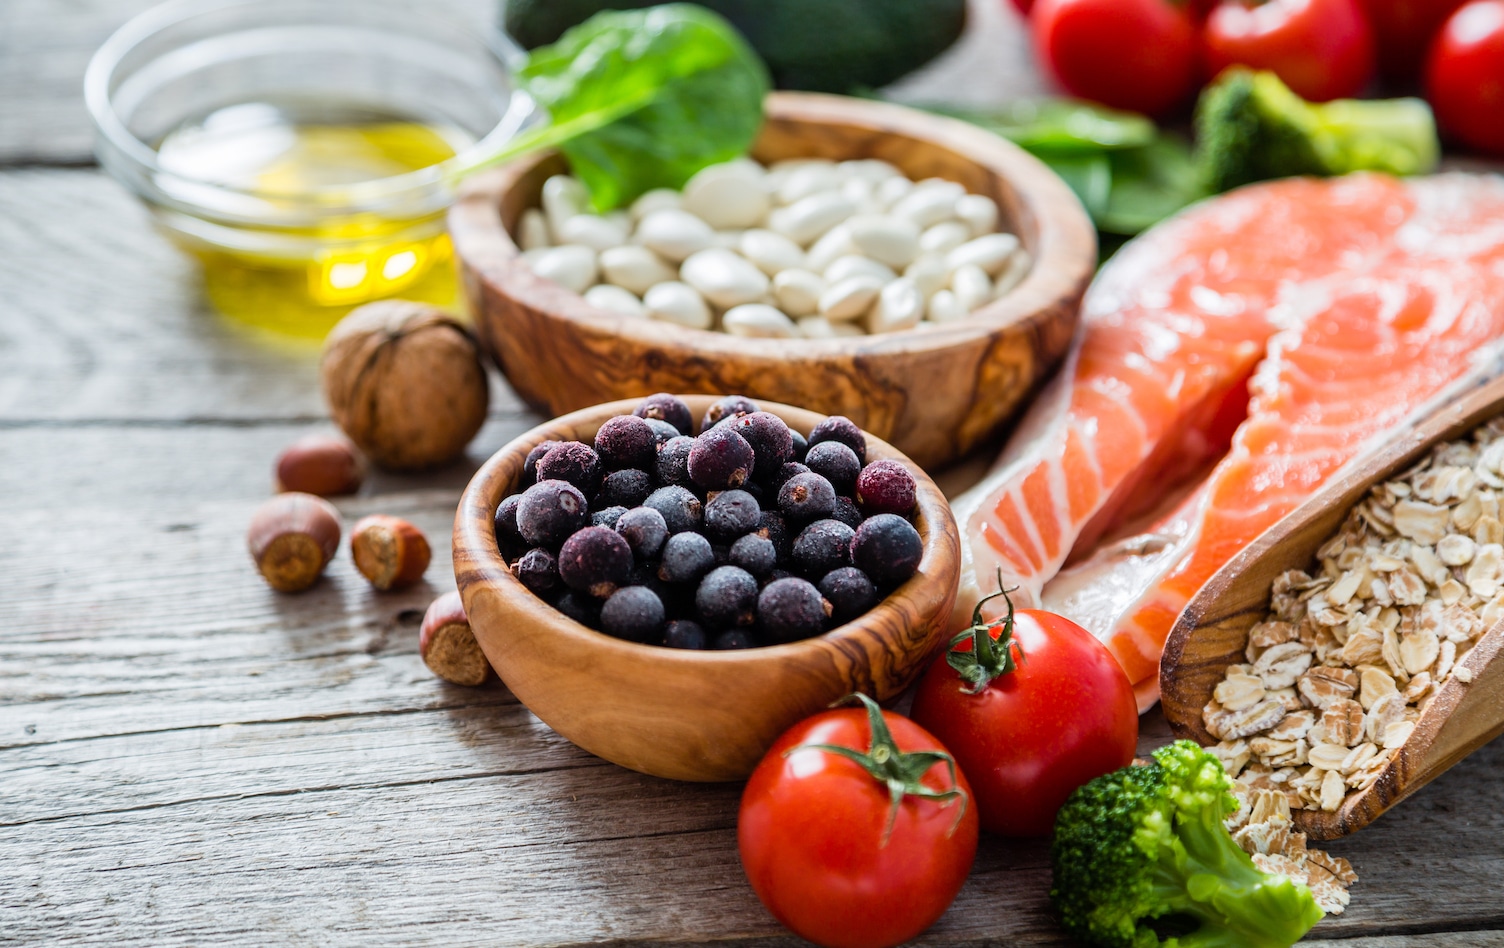 Macronutrients vs. Micronutrients: How Are They Different? | MyFitnessPal